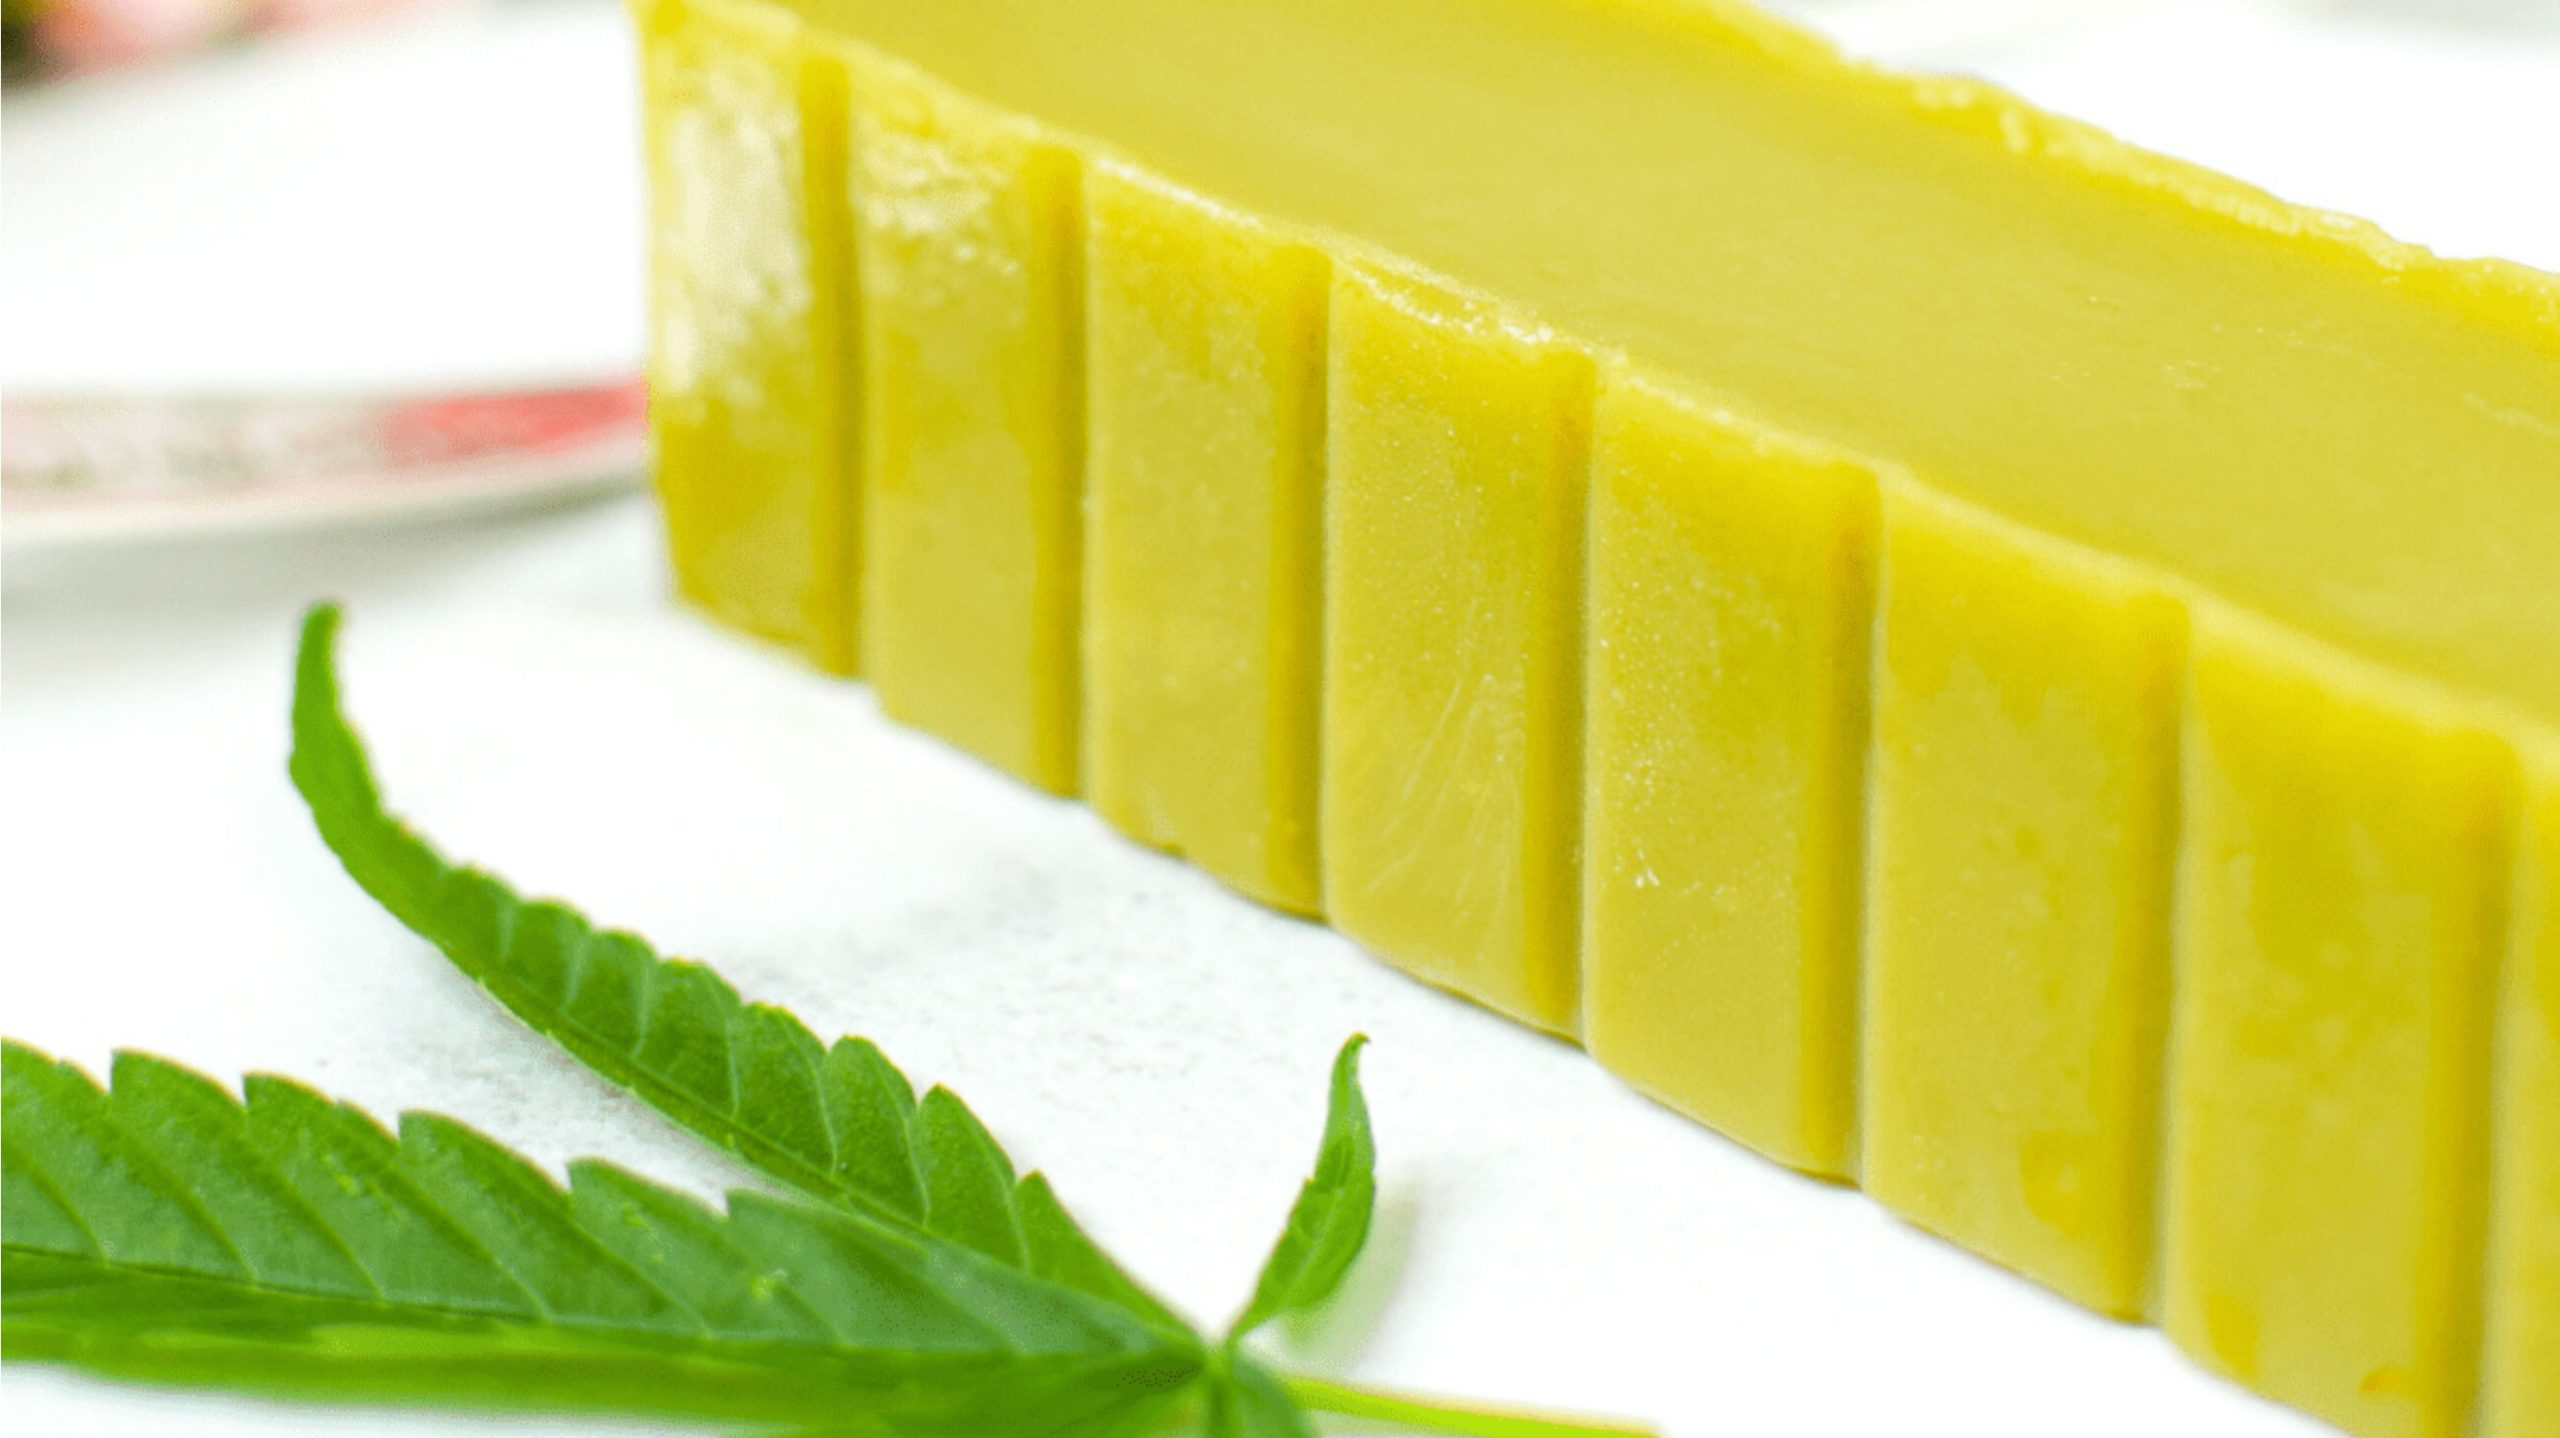 When it comes to making weed butter, you can use any type of cannabis you desire. Whether it's an Indica, Sativa, or hybrid strain, the choice is completely up to you.